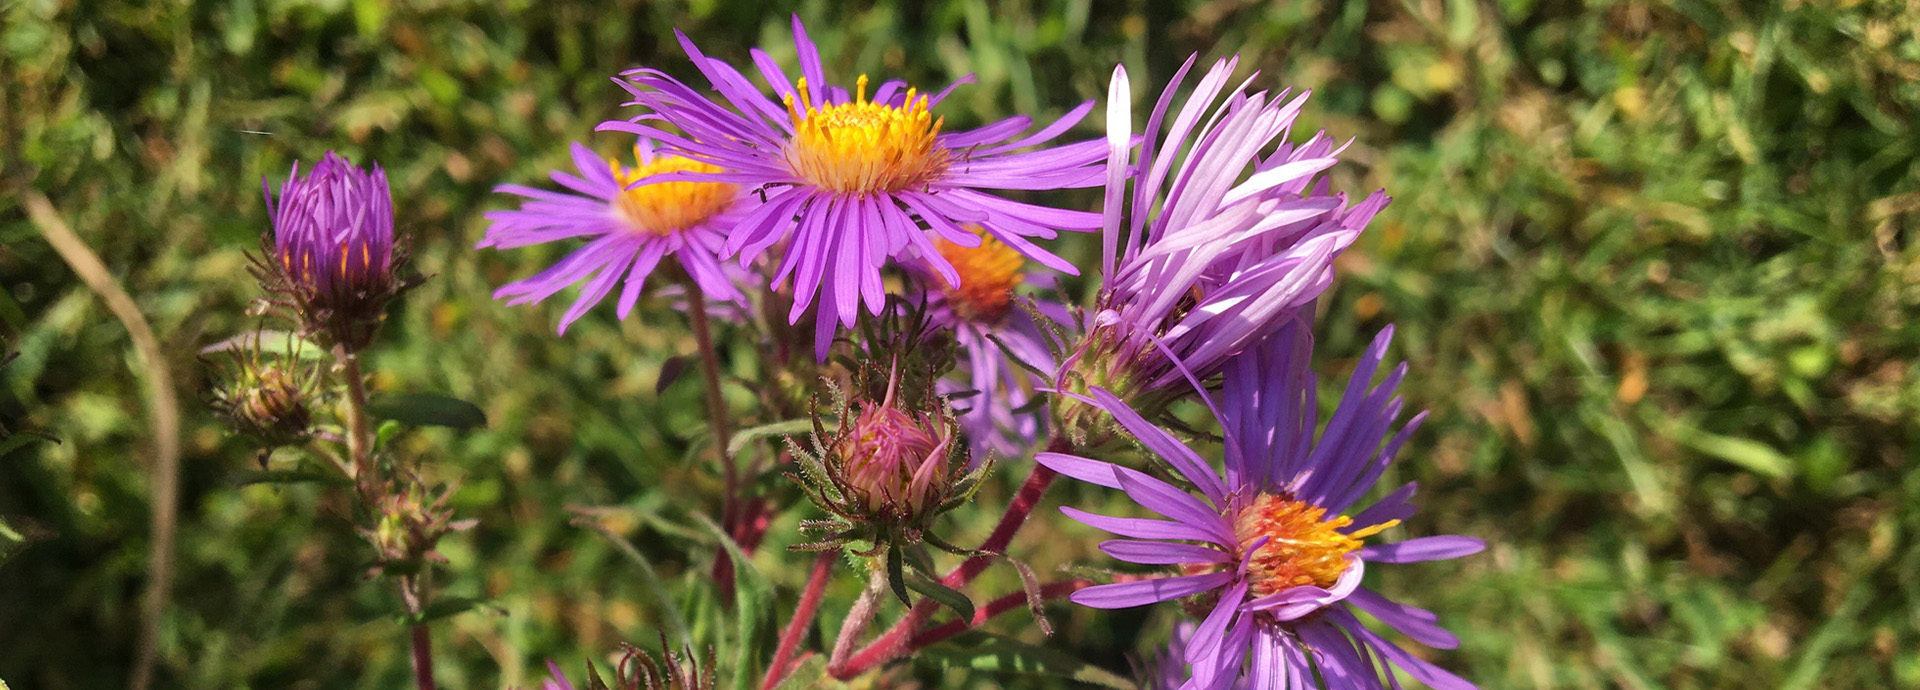 Slideshow Image - Bright purple New England Aster flowers with yellow centers